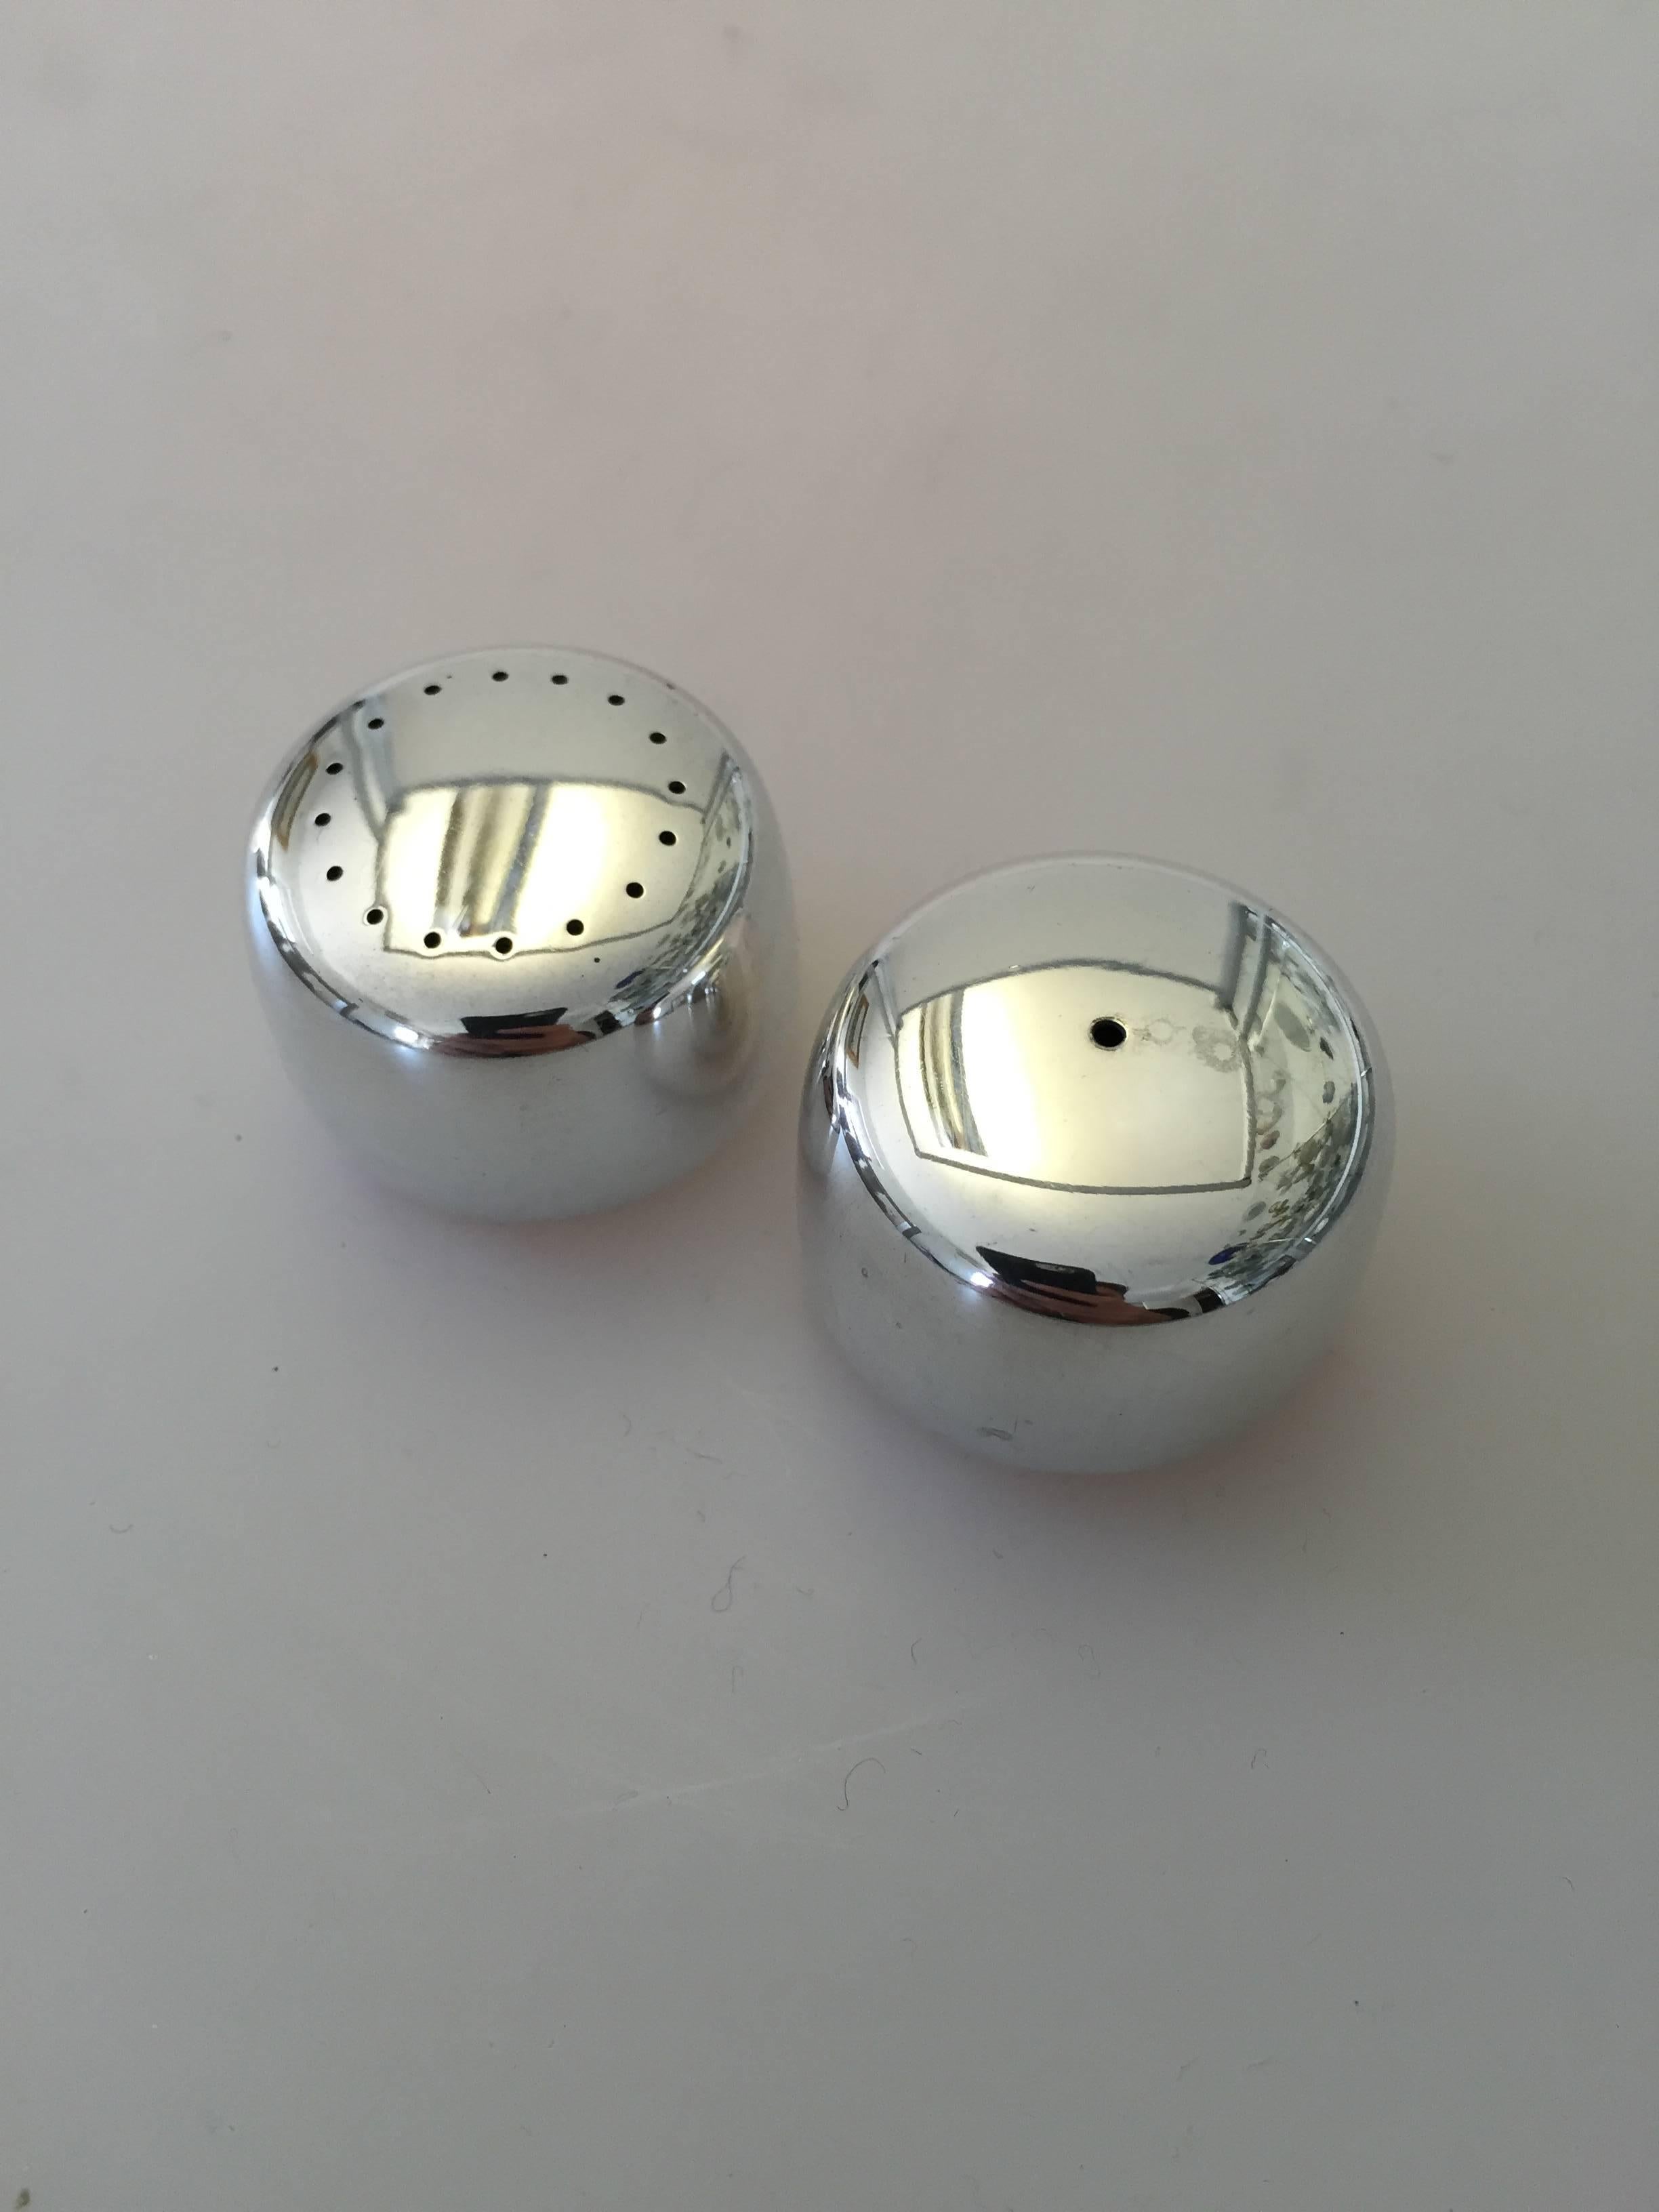 Georg Jensen sterling silver pair of salt and pepper shakers #1135 designed by Henning Koppel. The pair measures 2.5 cm x 3.2 cm and is in a good condition. We currently have two sets in stock.

Henning Koppels (1918-1981) modern designs broke new